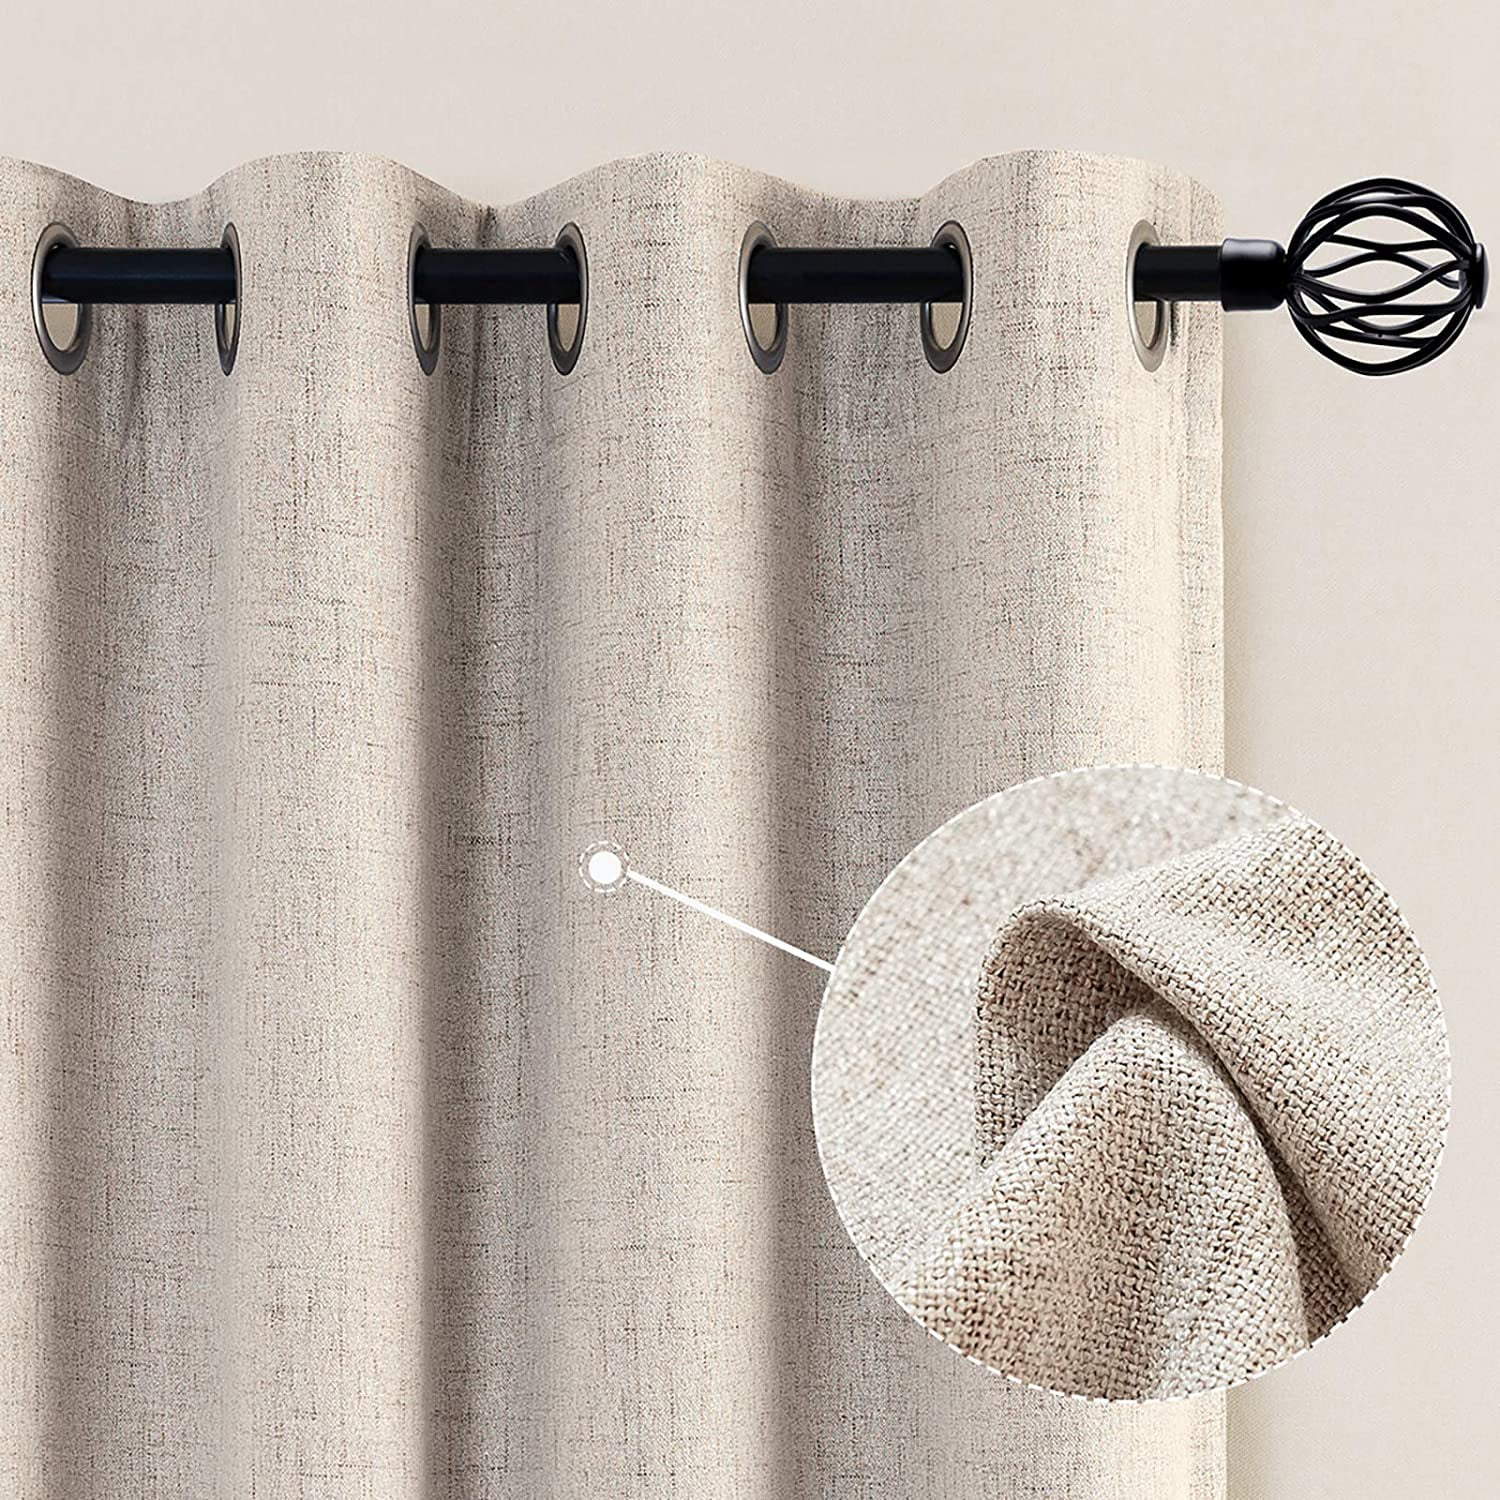 jinchan Linen Textured Curtains for Living Room Beige Grommet Top Window Treatment Set for Bedroom 2 Panels 95 inches Long Crude